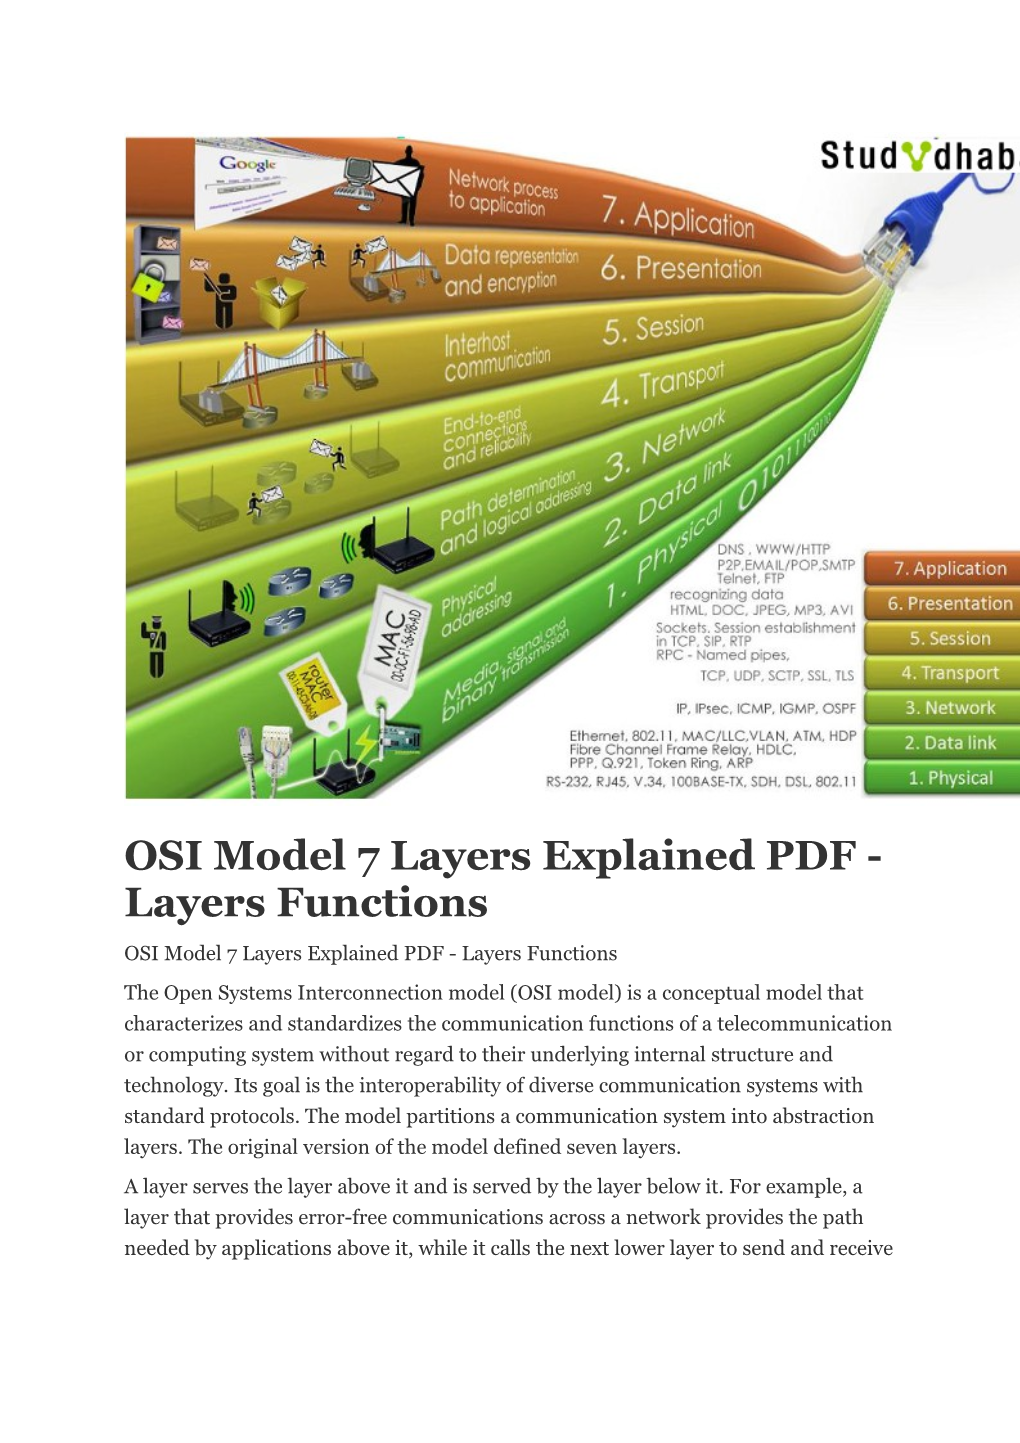 OSI Model 7 Layers Explained PDF - Layers Functions